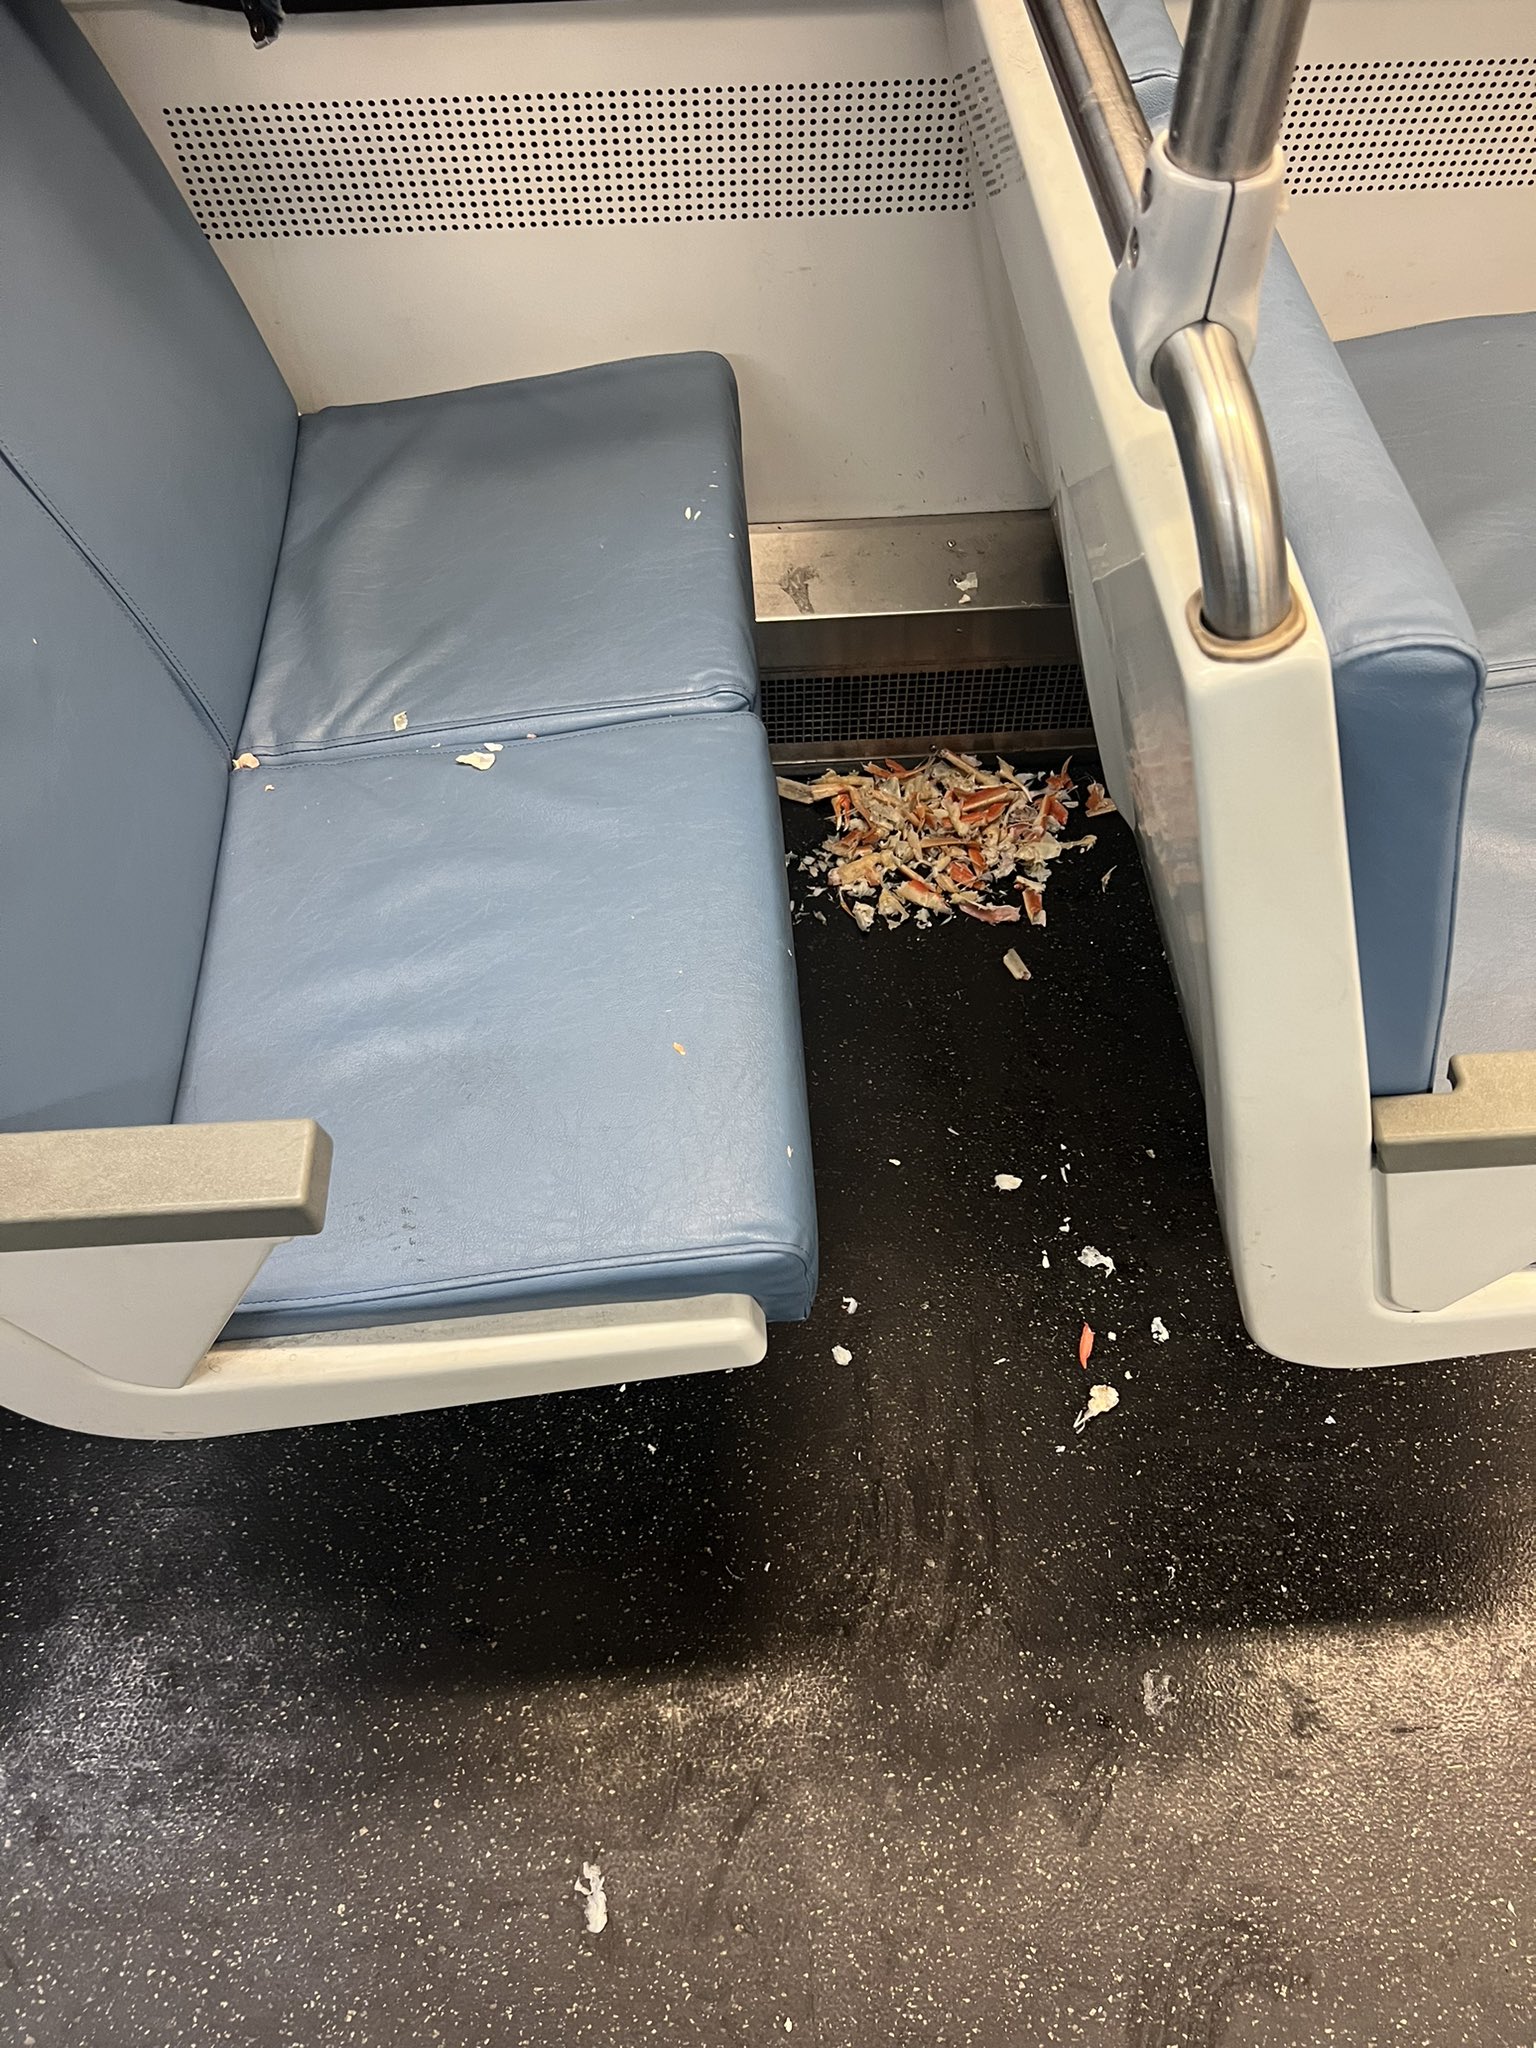 Passenger sparks debate after eating crab legs and then leaves the mess on a train 1